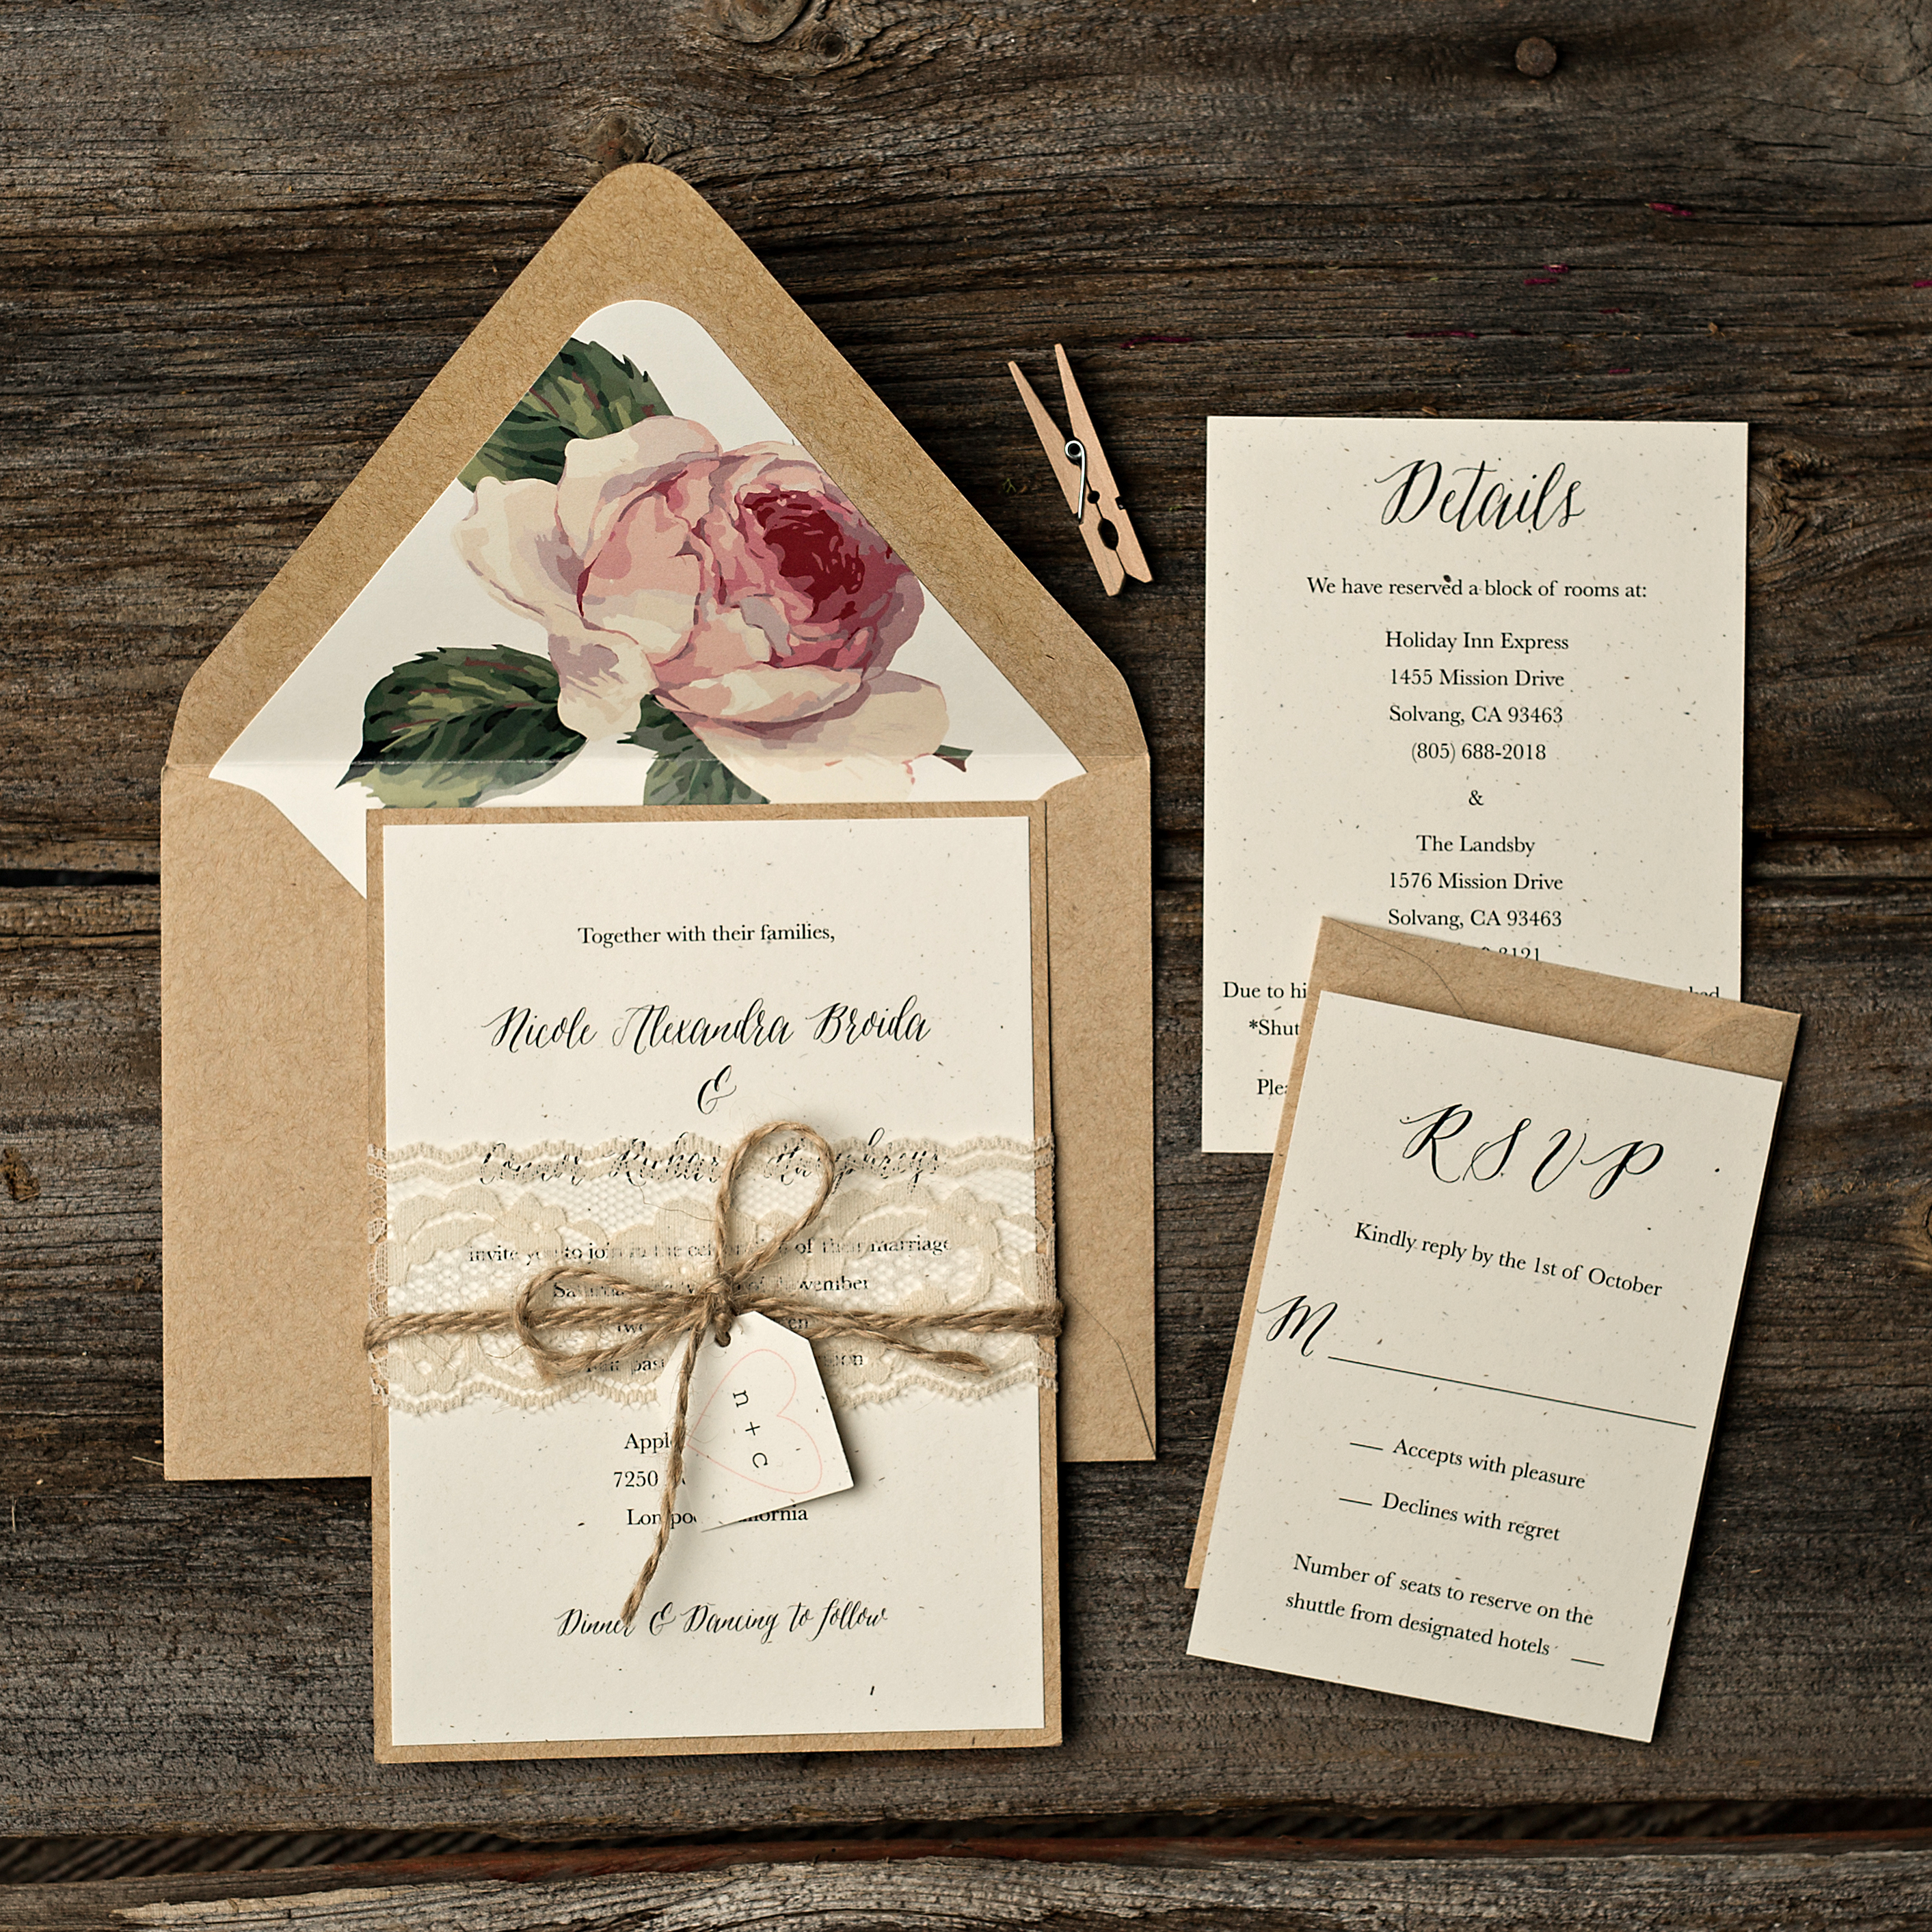 Country Chic Wedding Invitations Rustic Chic Wedding Invitations Too Chic Little Shab Design